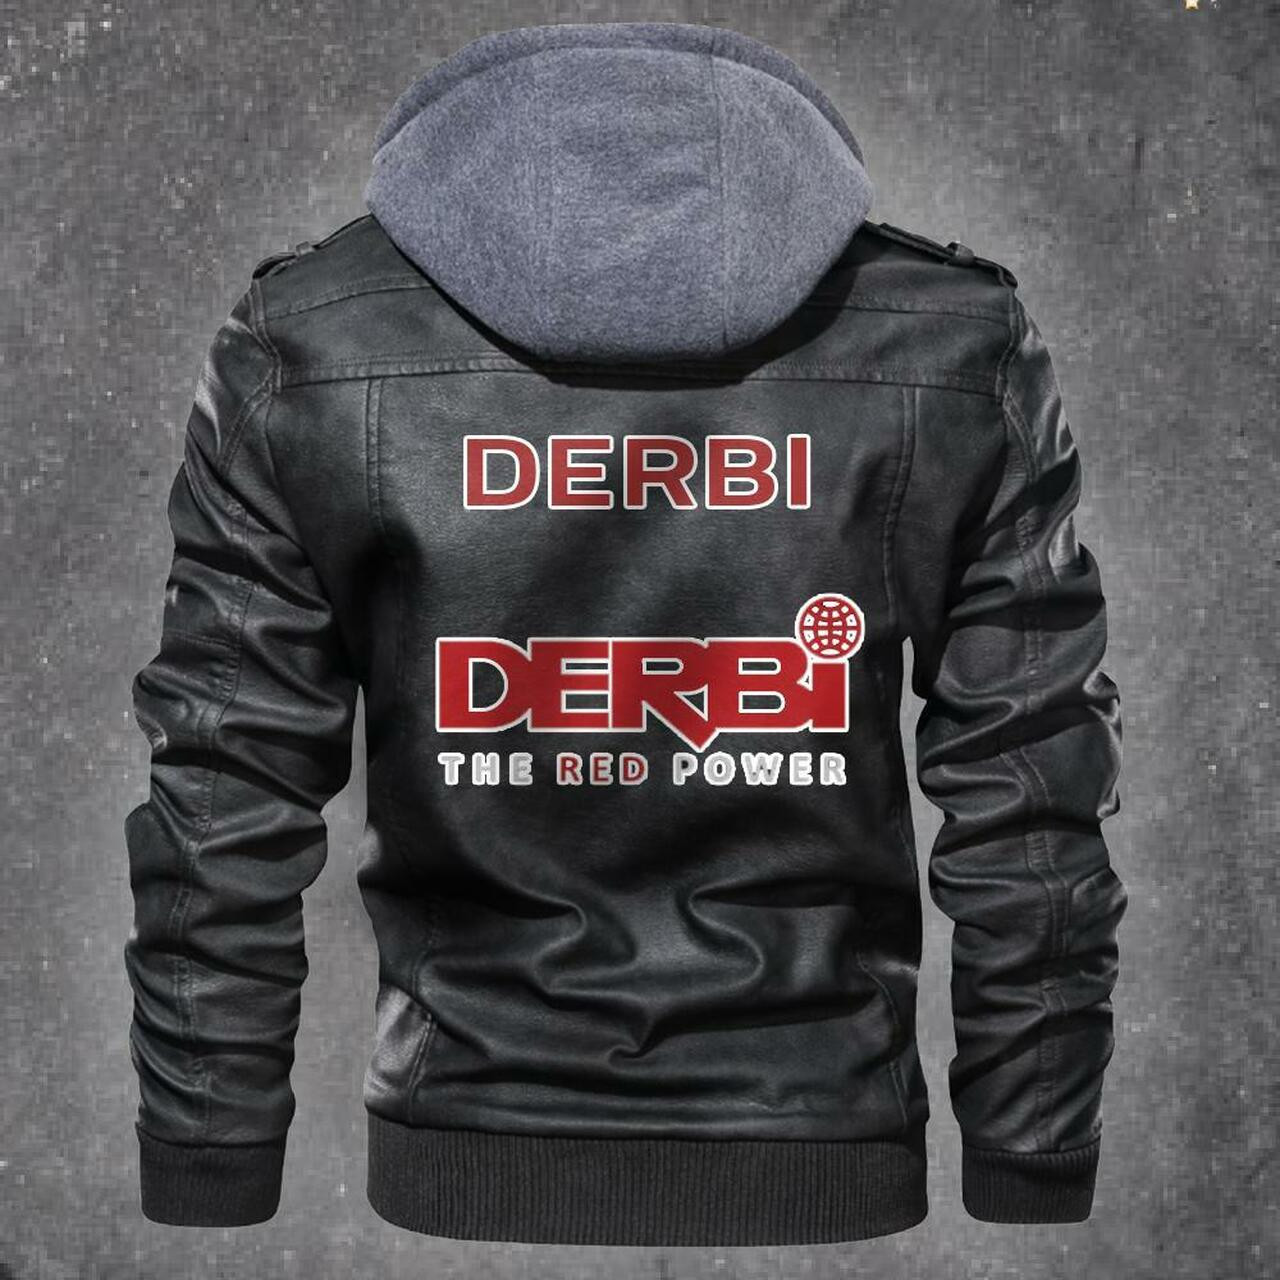 Our store has all of the latest leather jacket 60